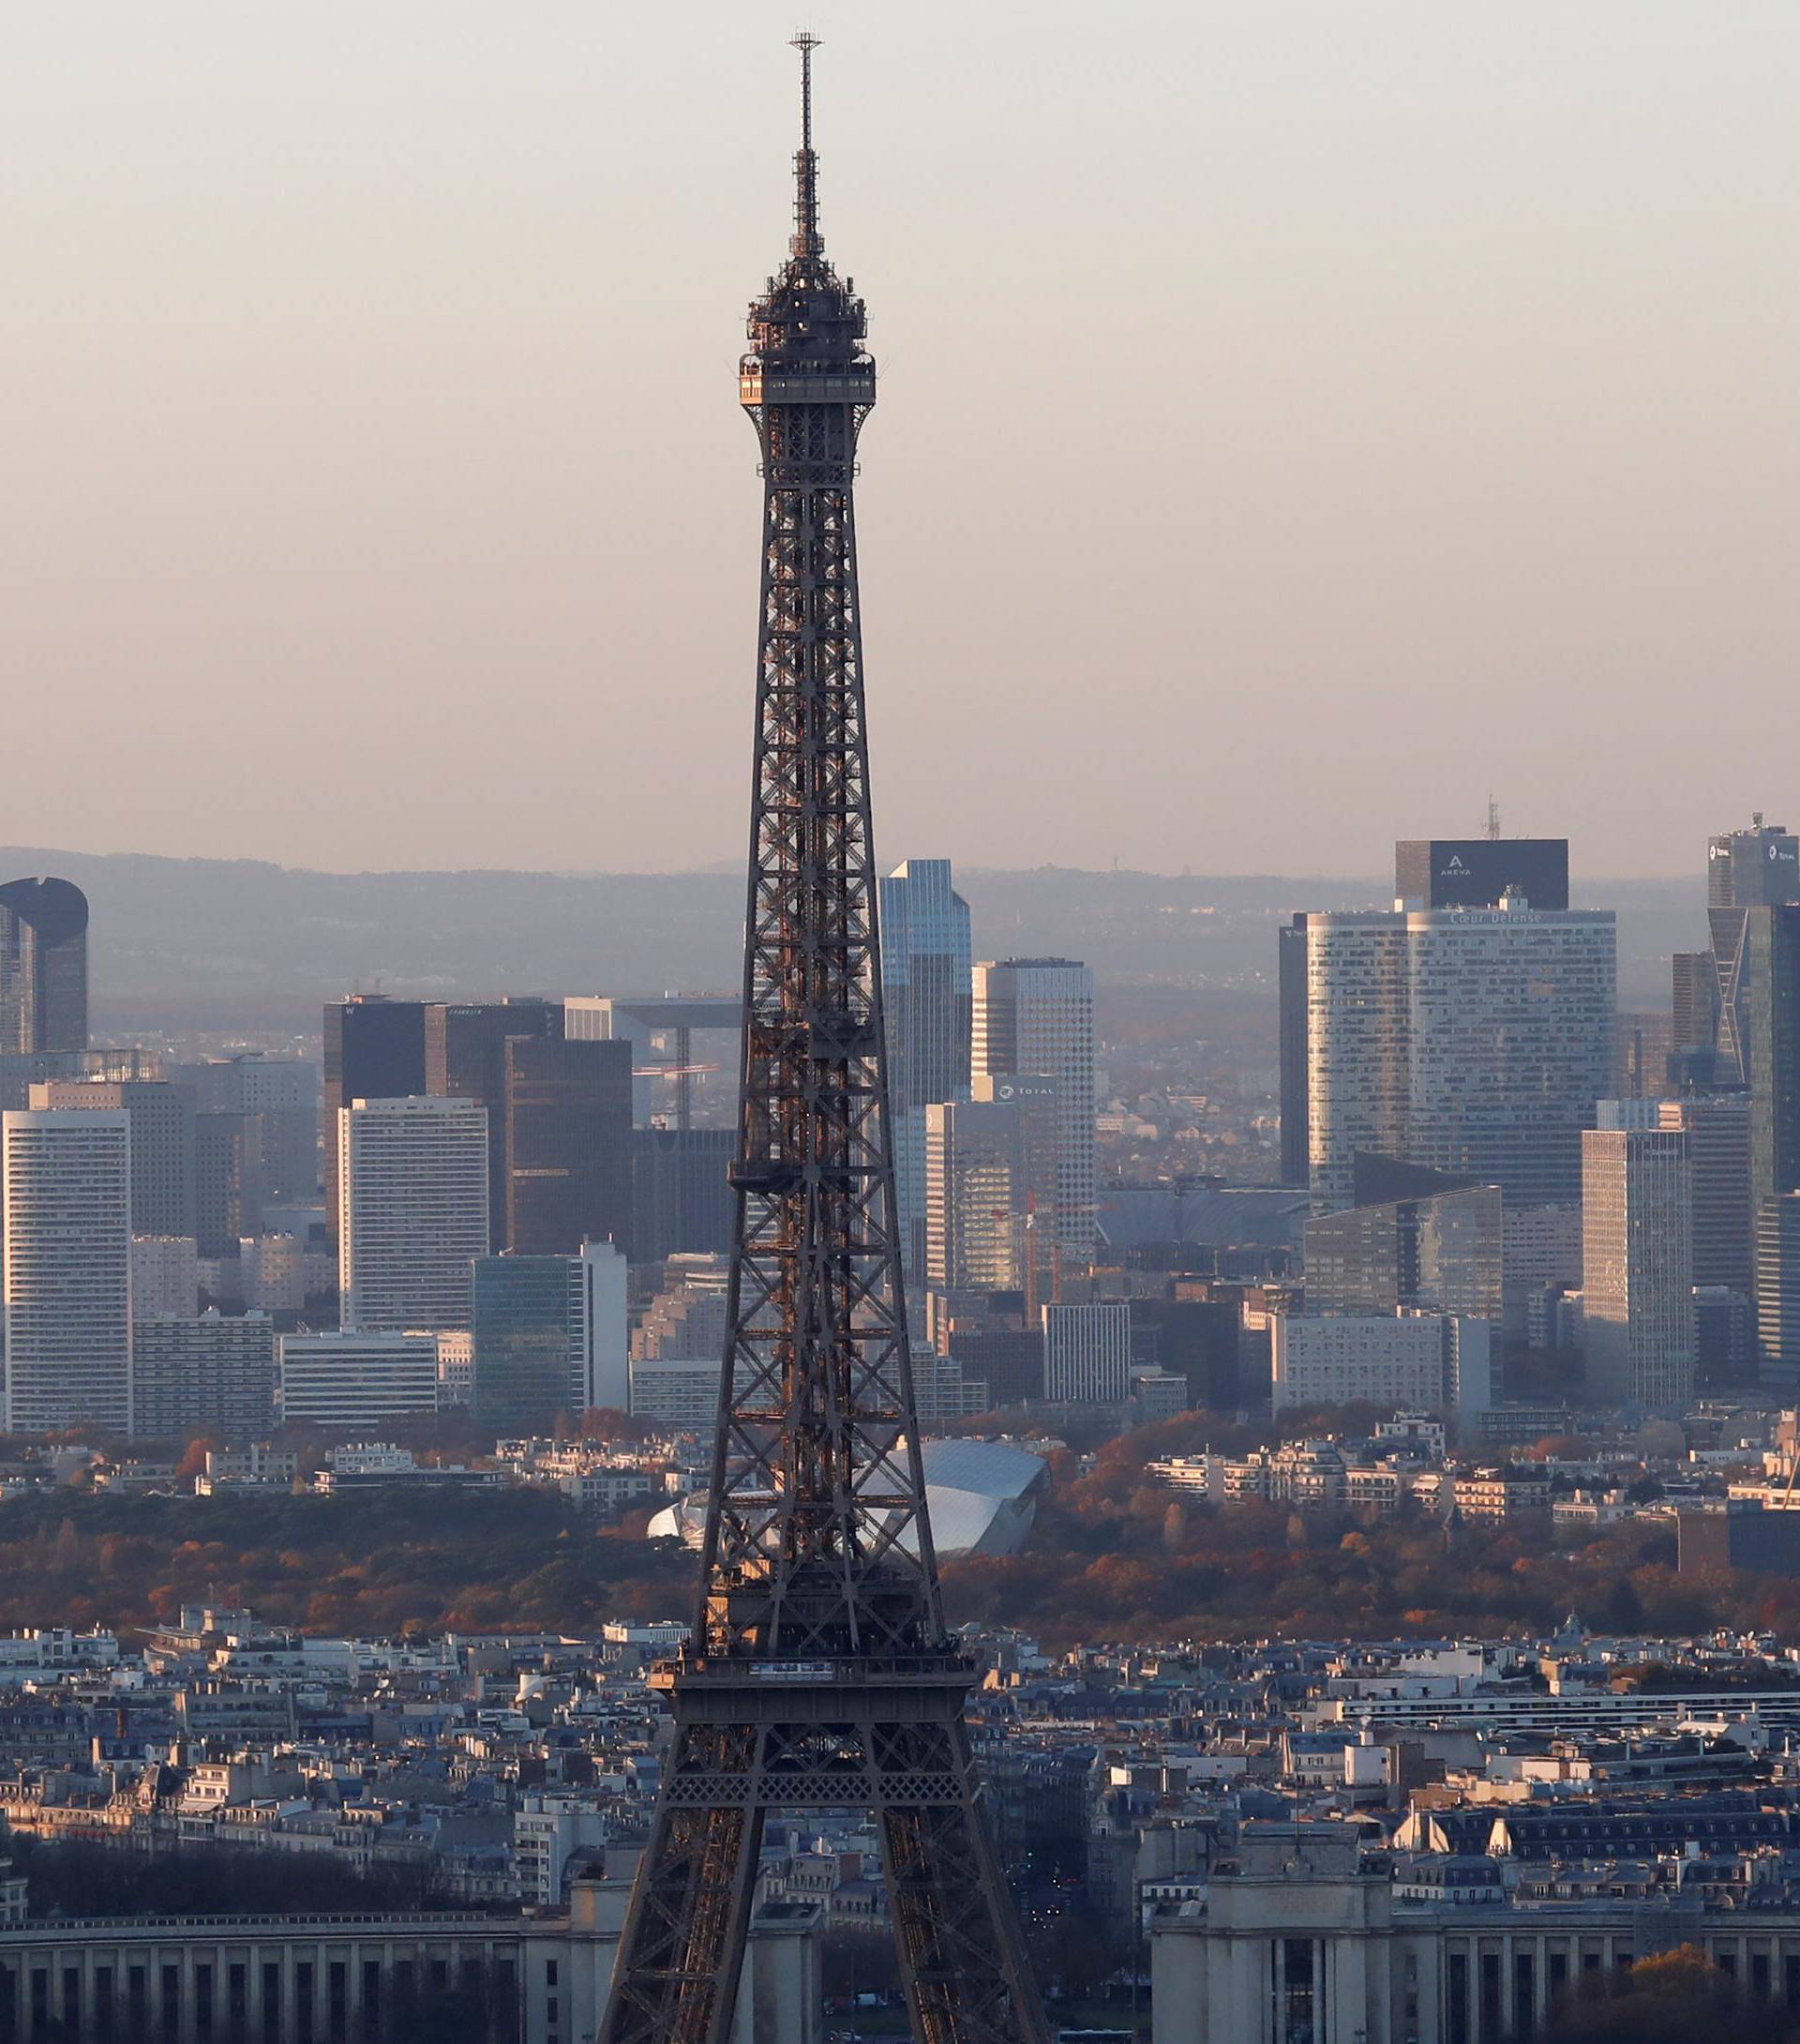 FILE PHOTO - A general view shows the Eiffel Tower and the financial and business district in La Defense, west of Paris